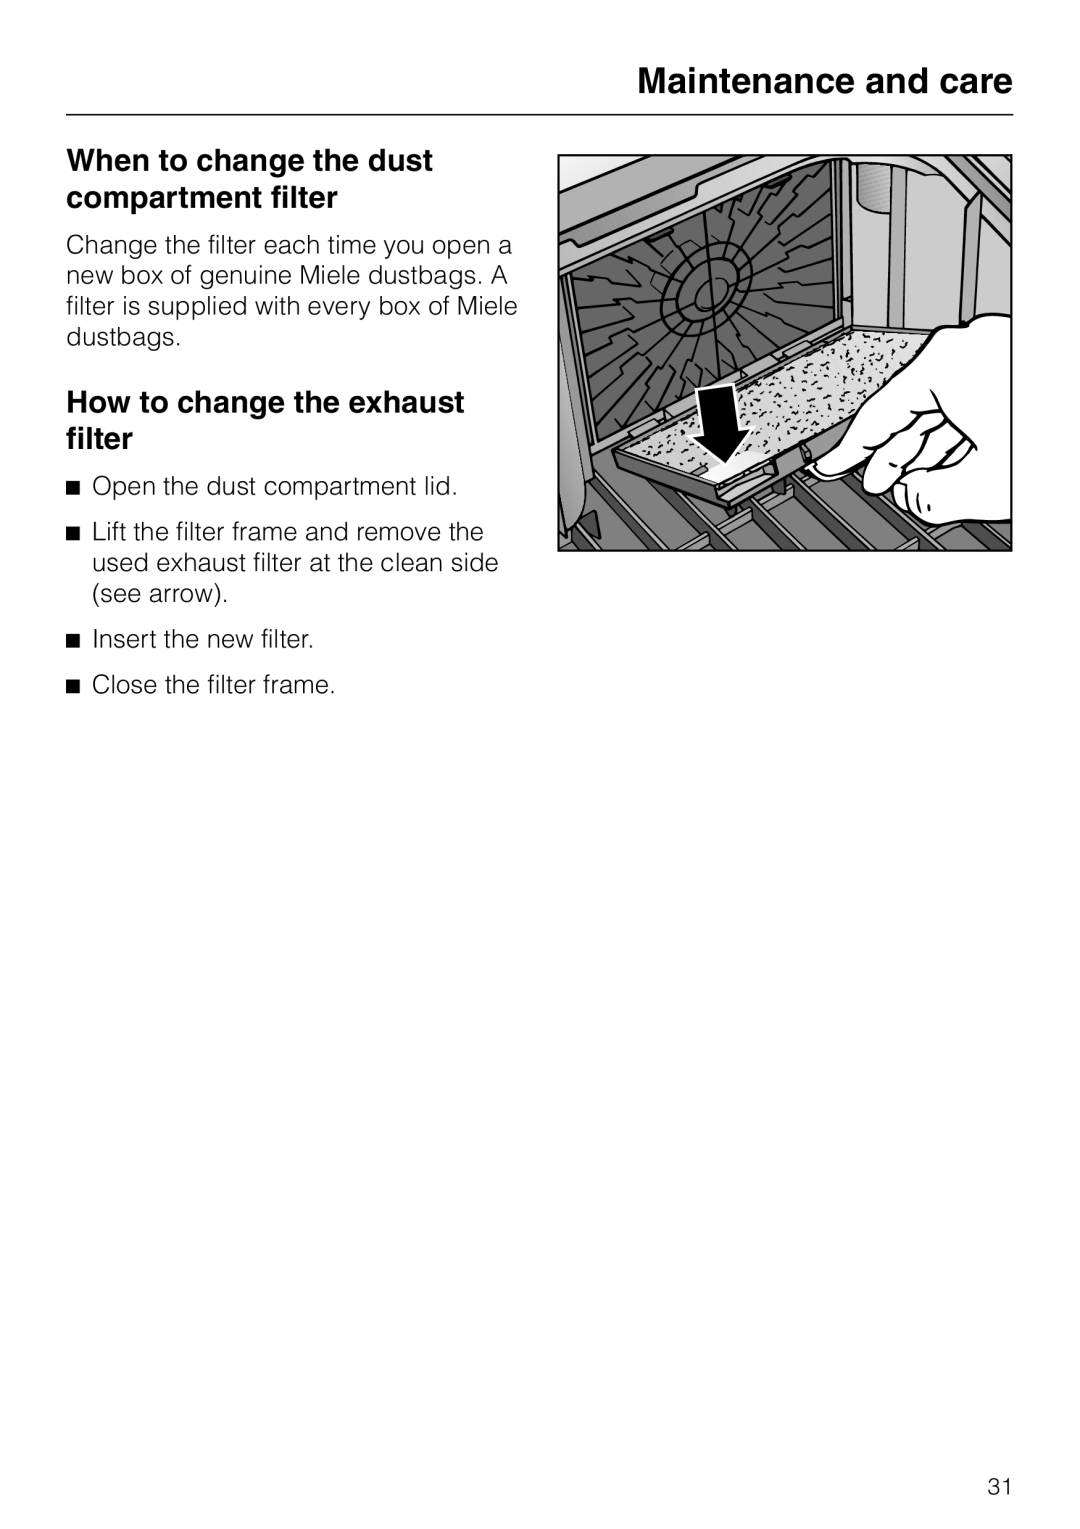 Miele S 5000 When to change the dust compartment filter, How to change the exhaust filter, Maintenance and care 